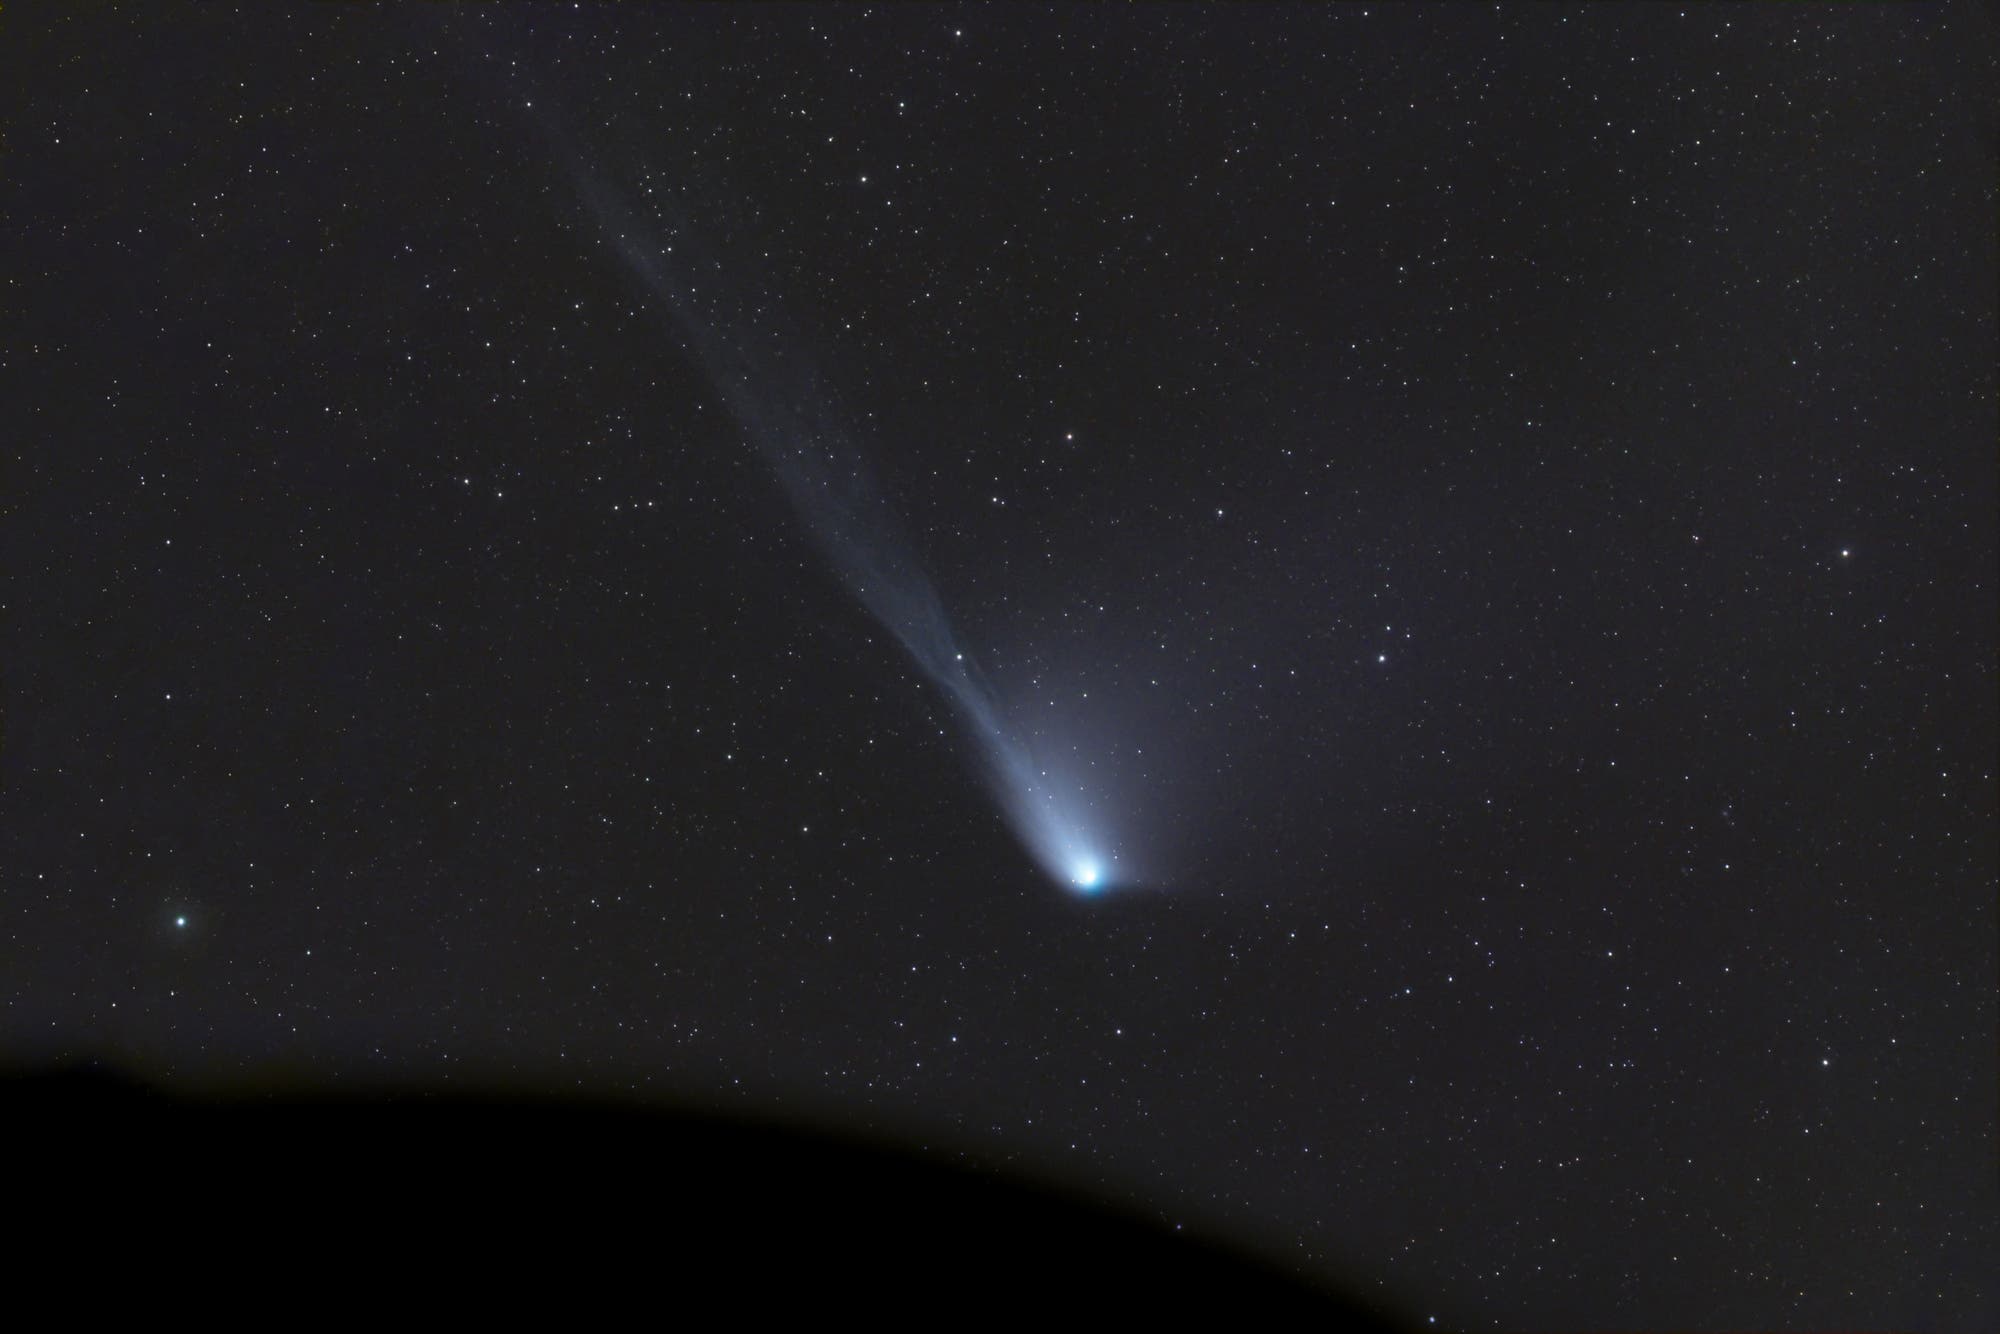 Comet 12P/Pons-Brooks over the southern horizon